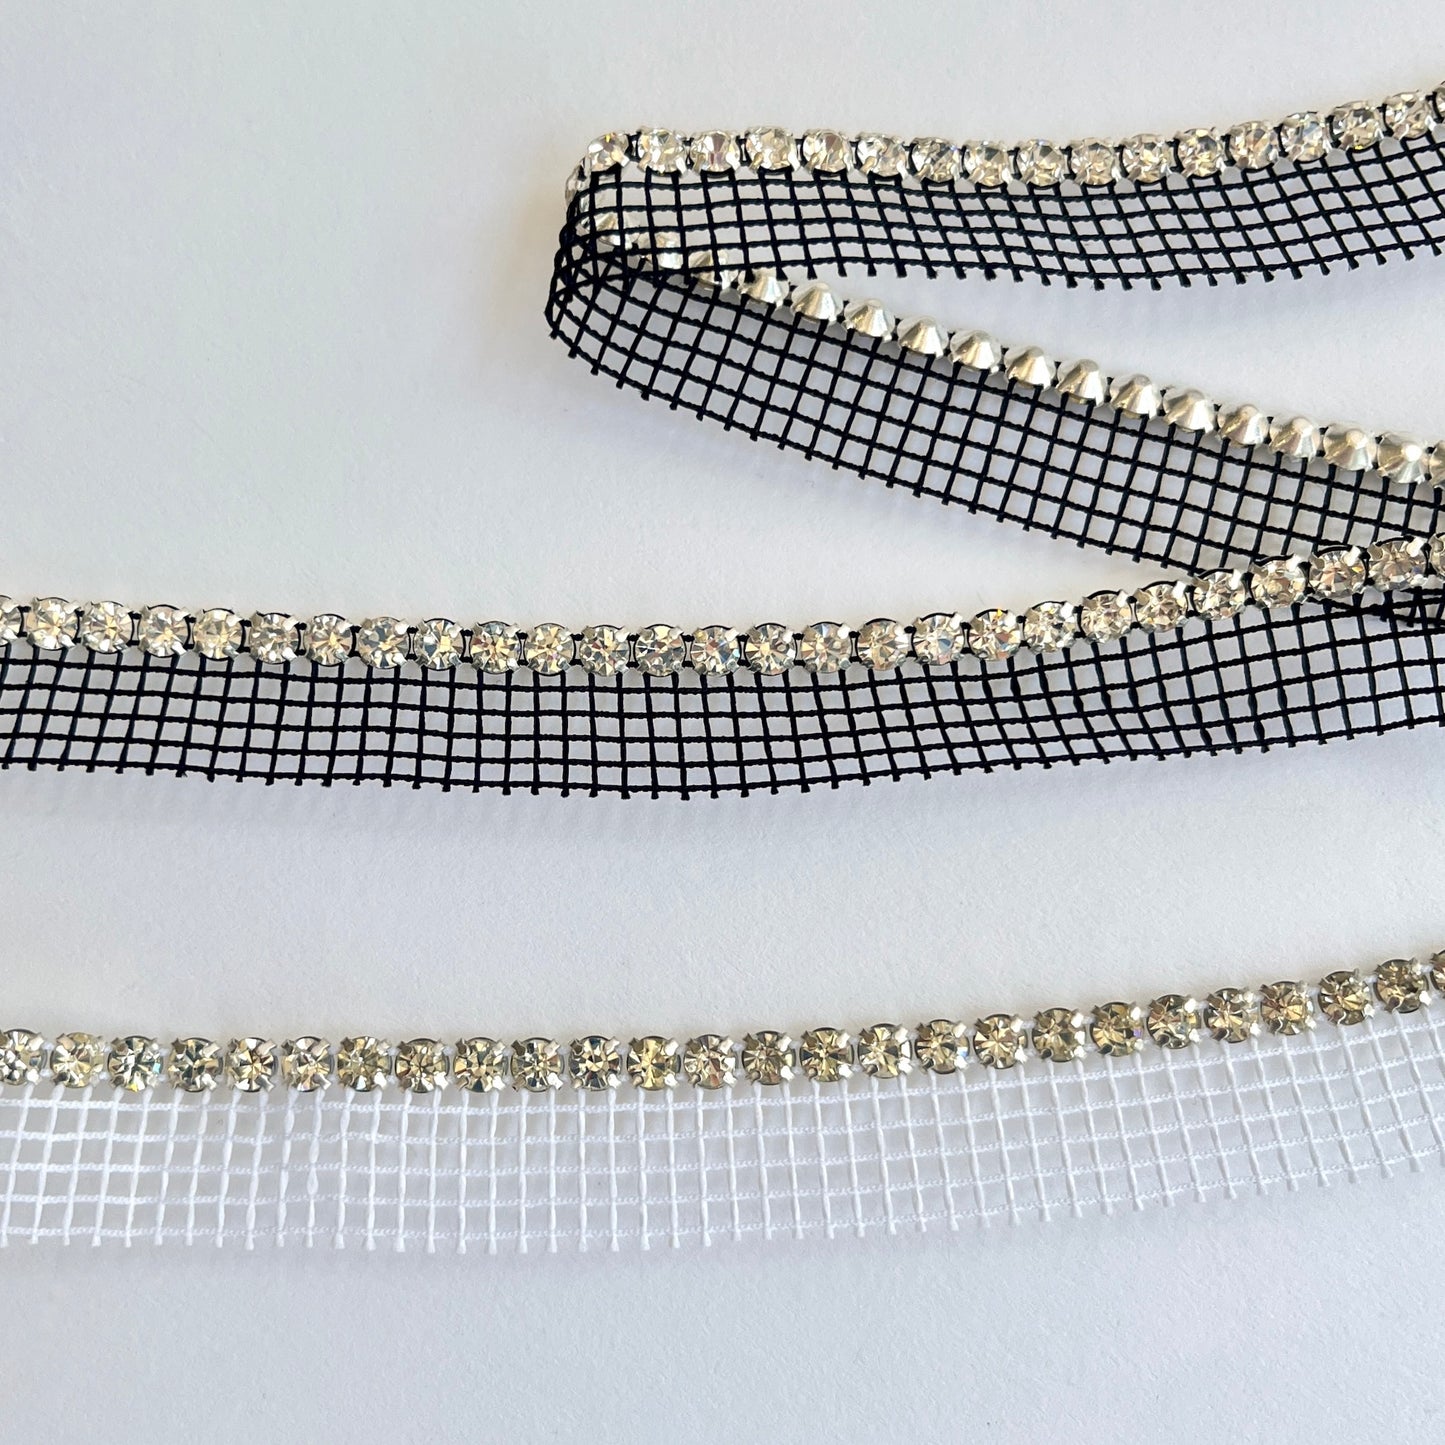 Sparkly rhinestone insertion trim - premium high grade diamanté crystals on a flexible net insertion tape. Please note - we have very limited stock of the white colour way.  Black/clear crystal: Sold by the metre  White/clear crystal: LIMITED STOCK - 80cm length only